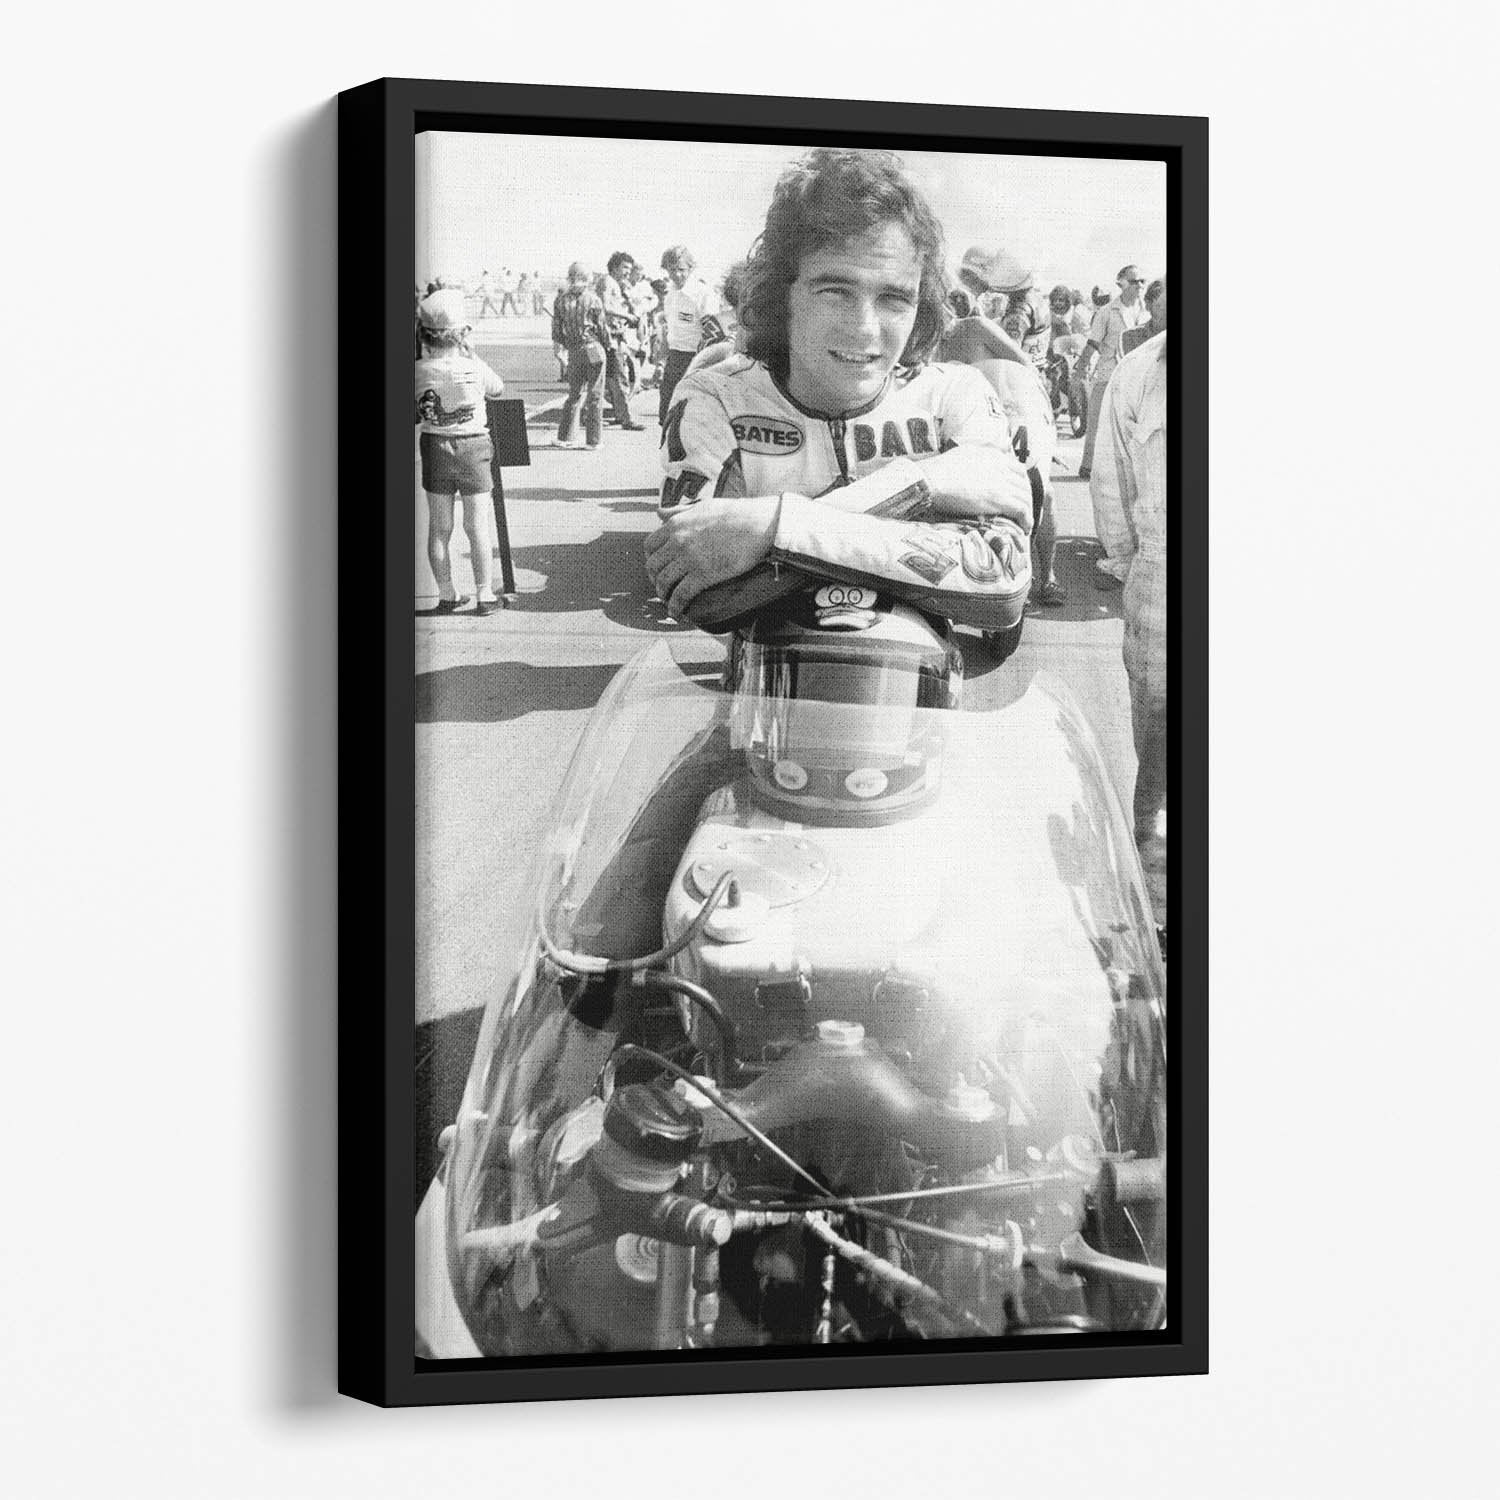 Barry Sheene motorcycle racing champion Floating Framed Canvas